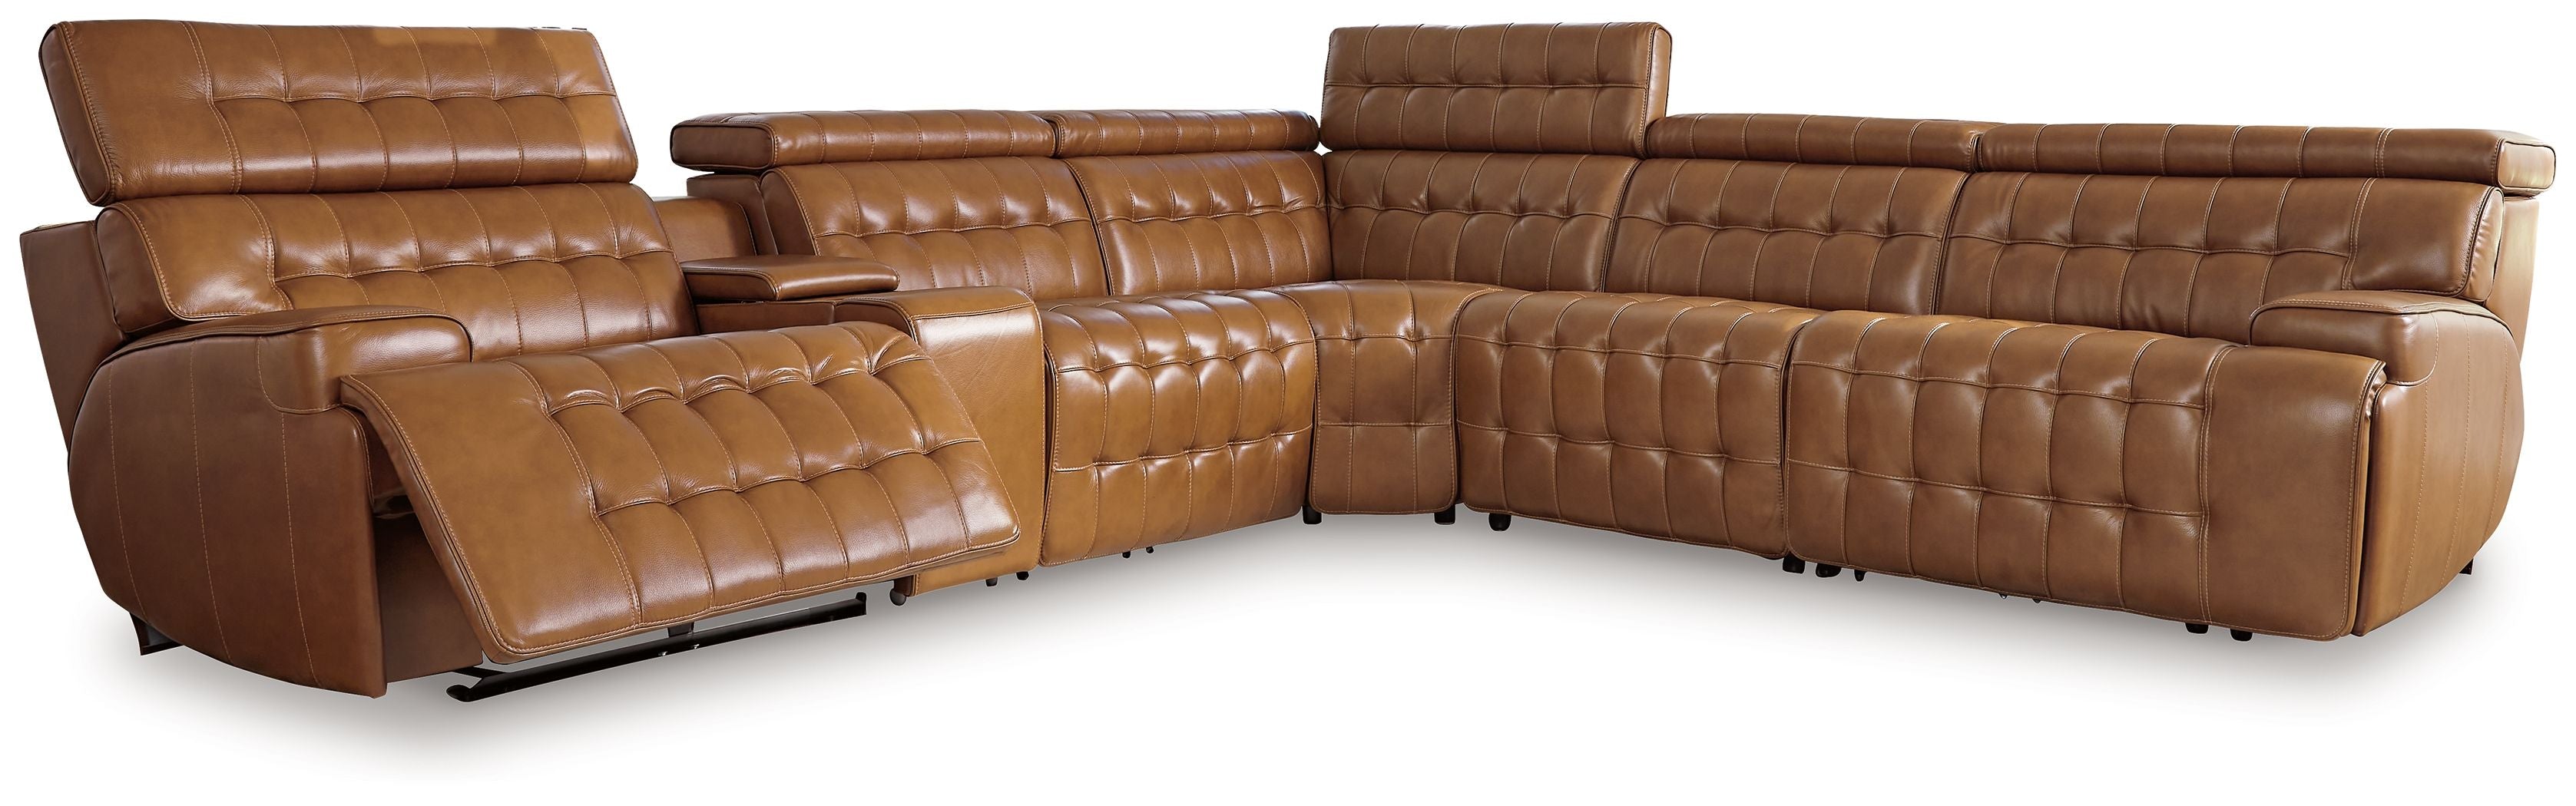 Temmpton Brown Power Leather Reclining Sectional-Reclining Sectionals-American Furniture Outlet